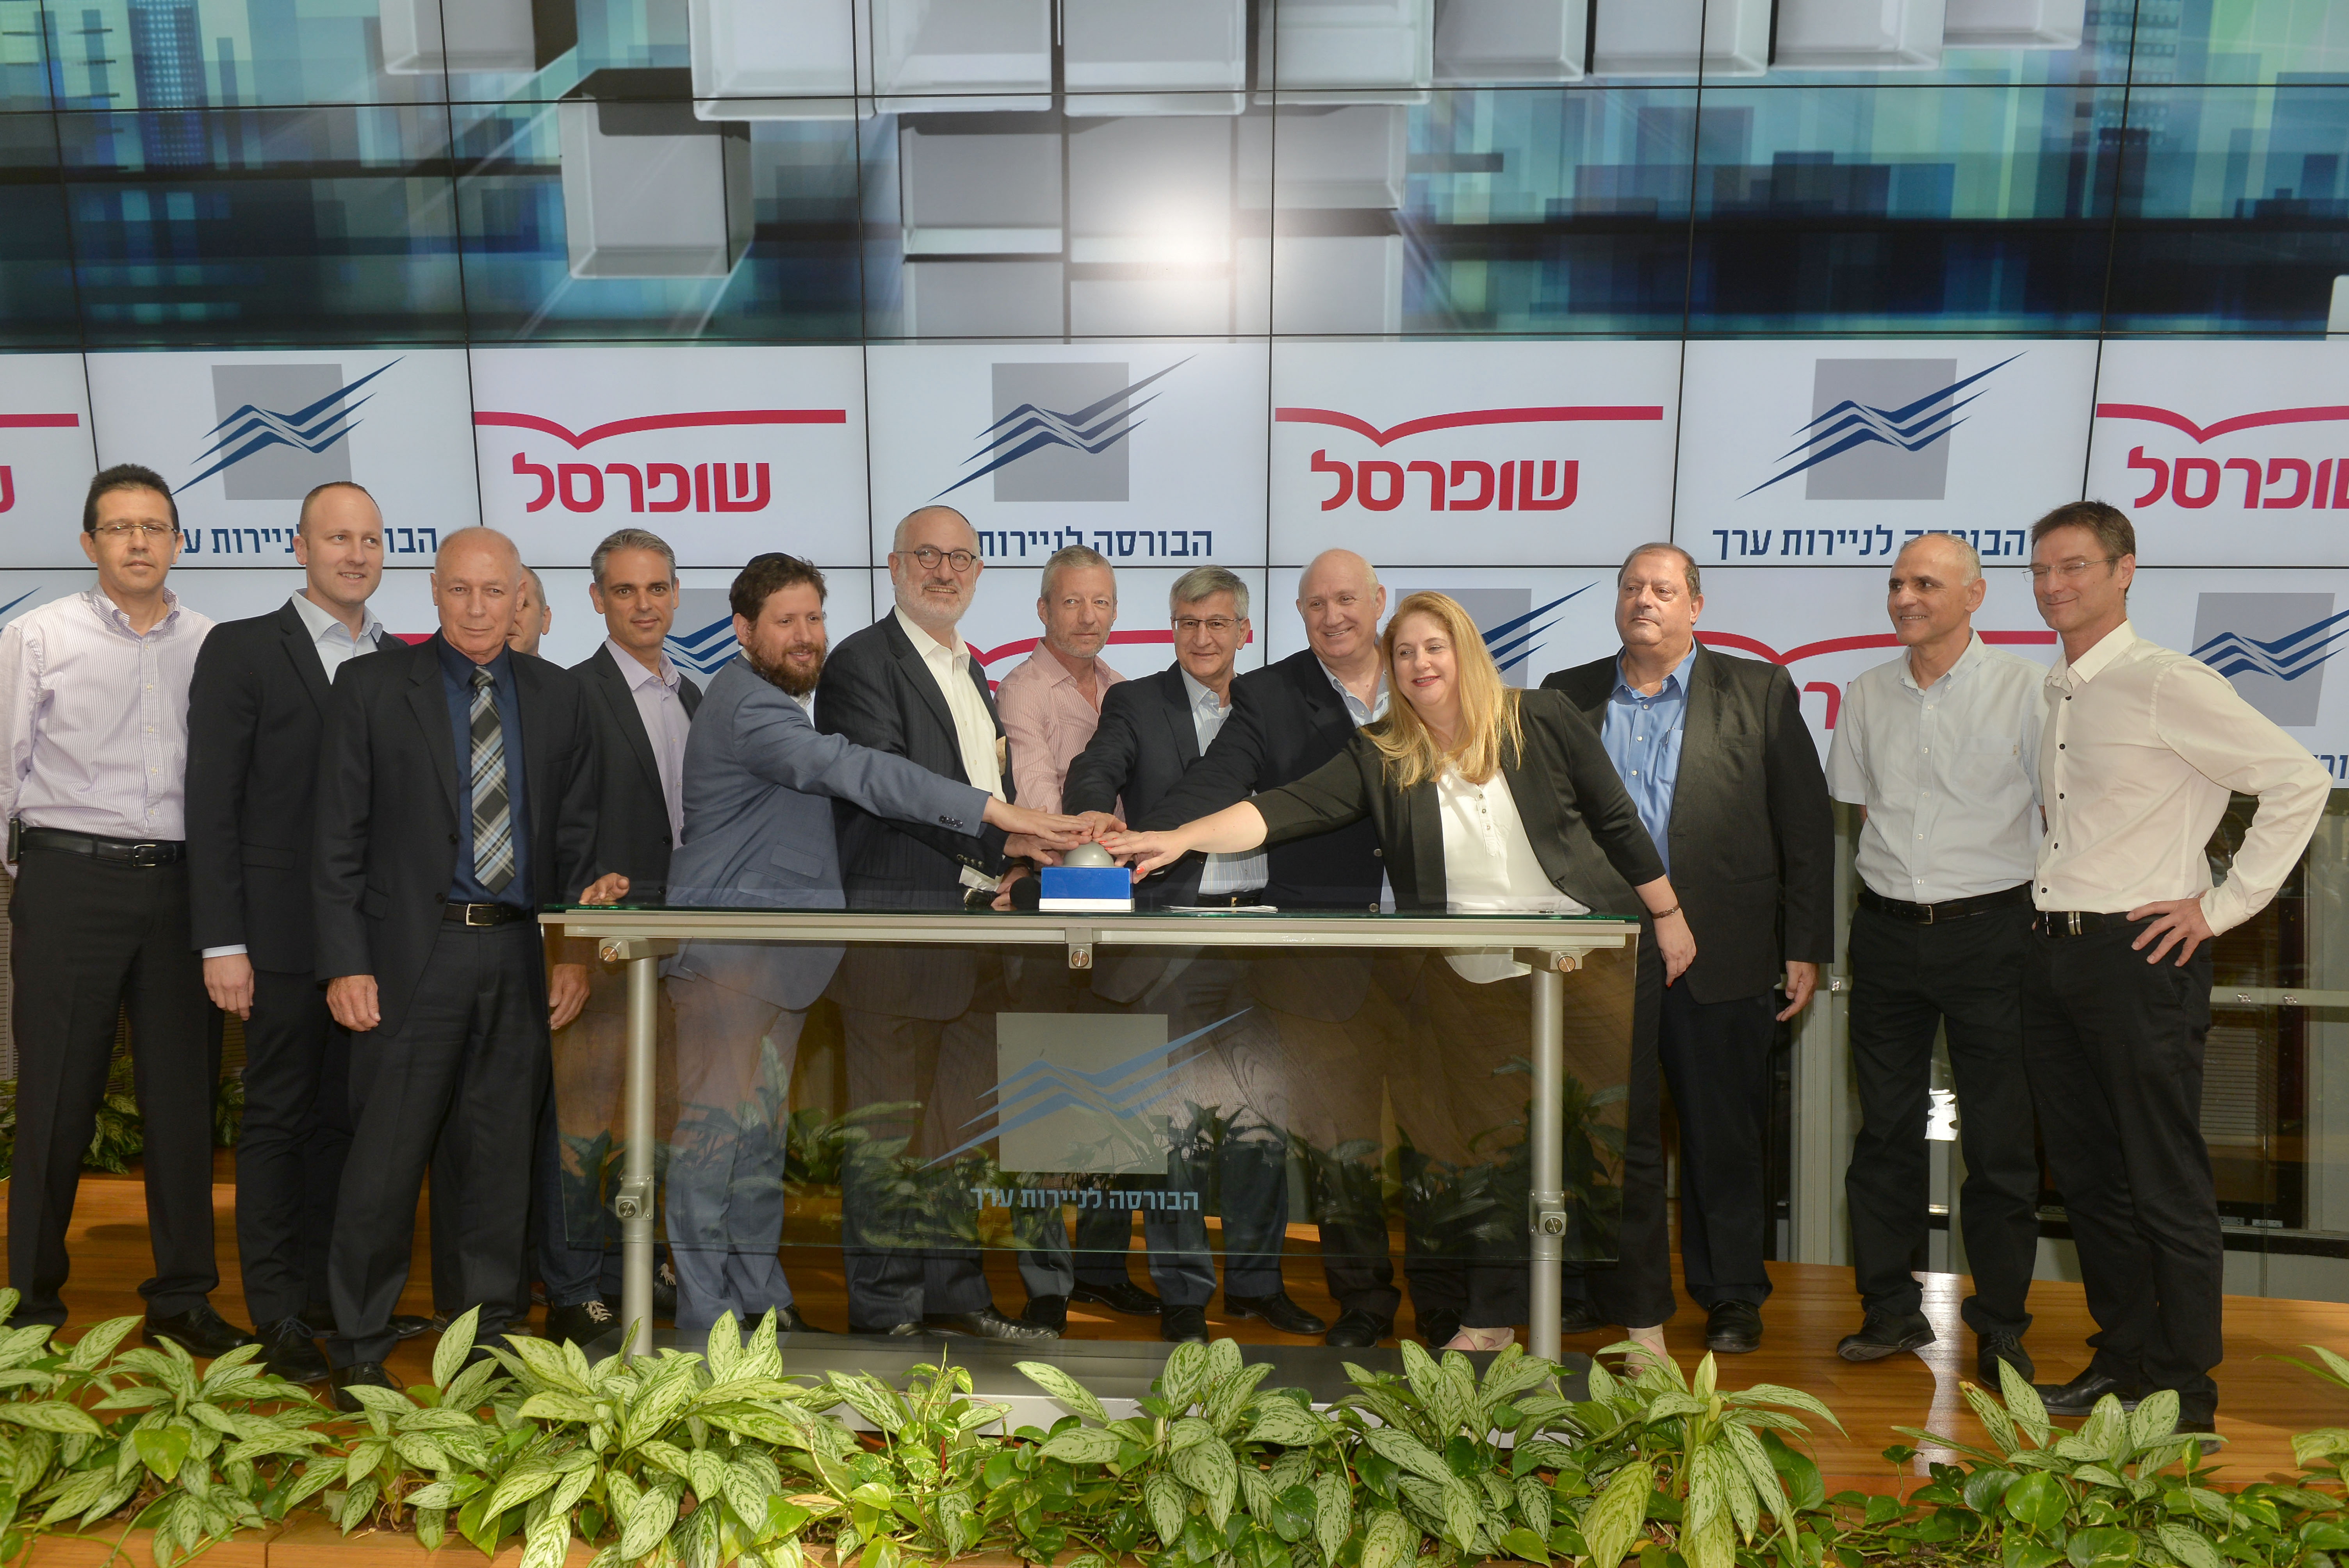 Shufersal's management took part in the Opening Bell Ceremony 